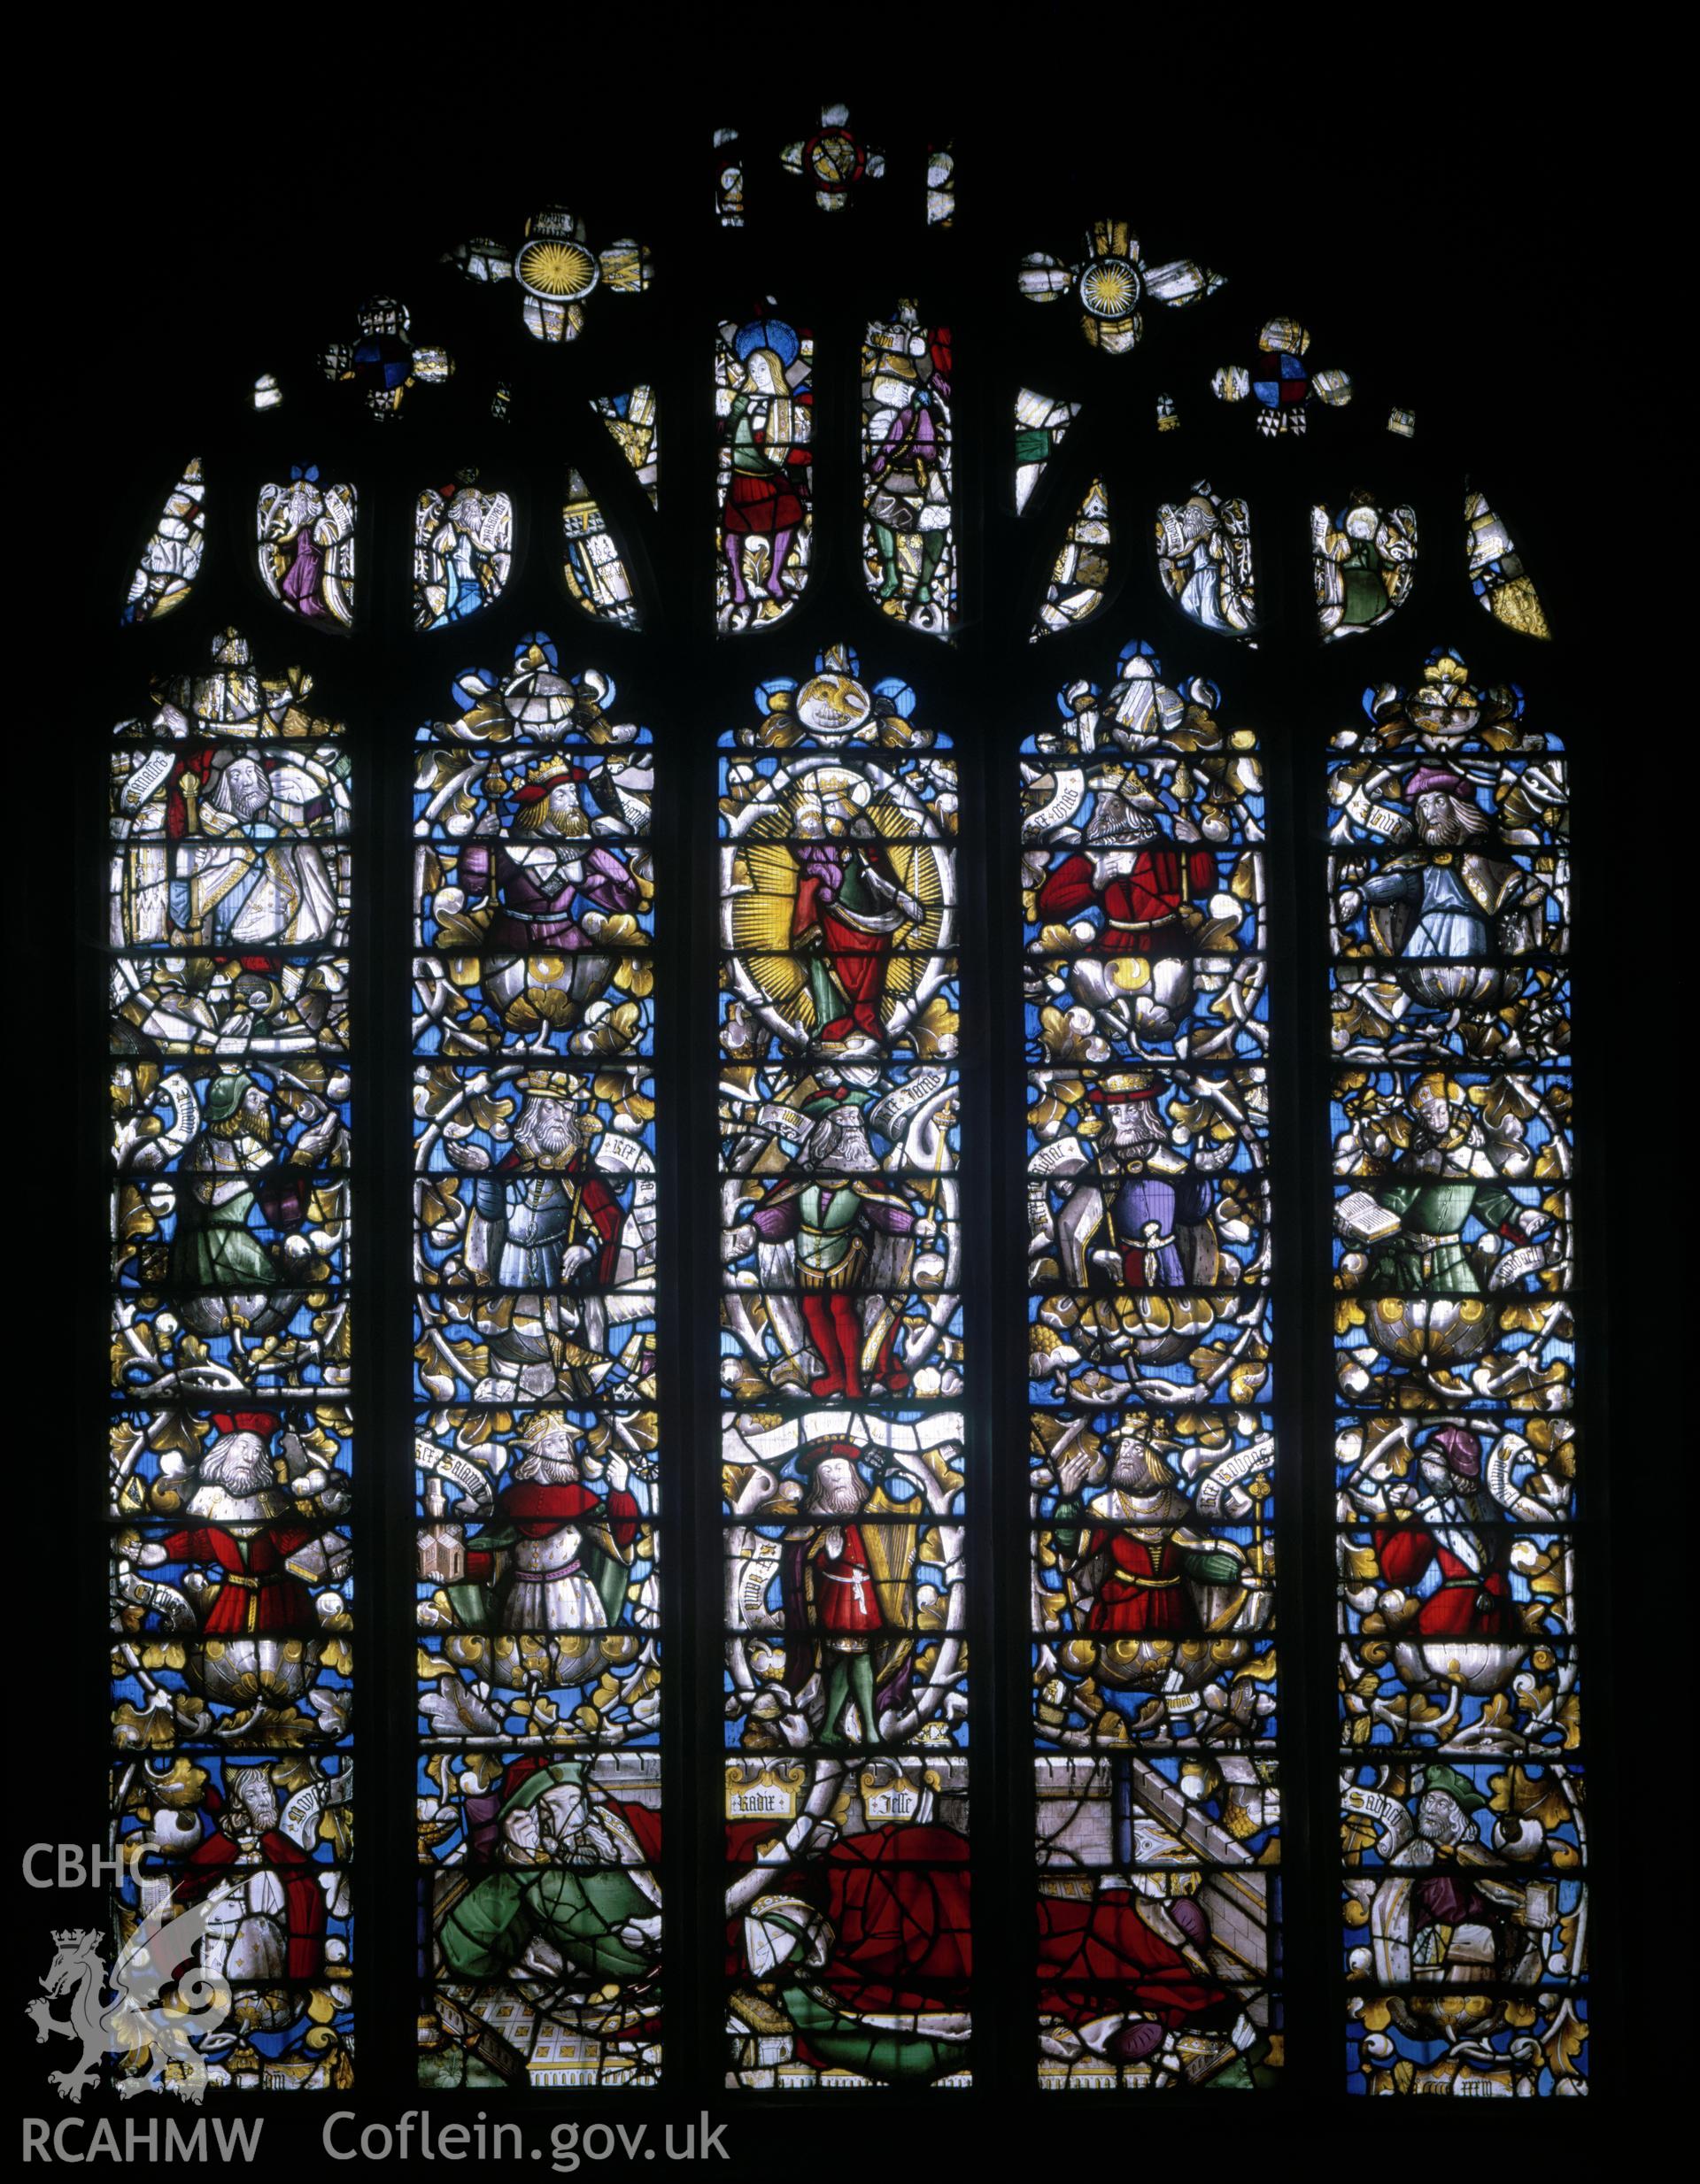 Interior: Stained glass window